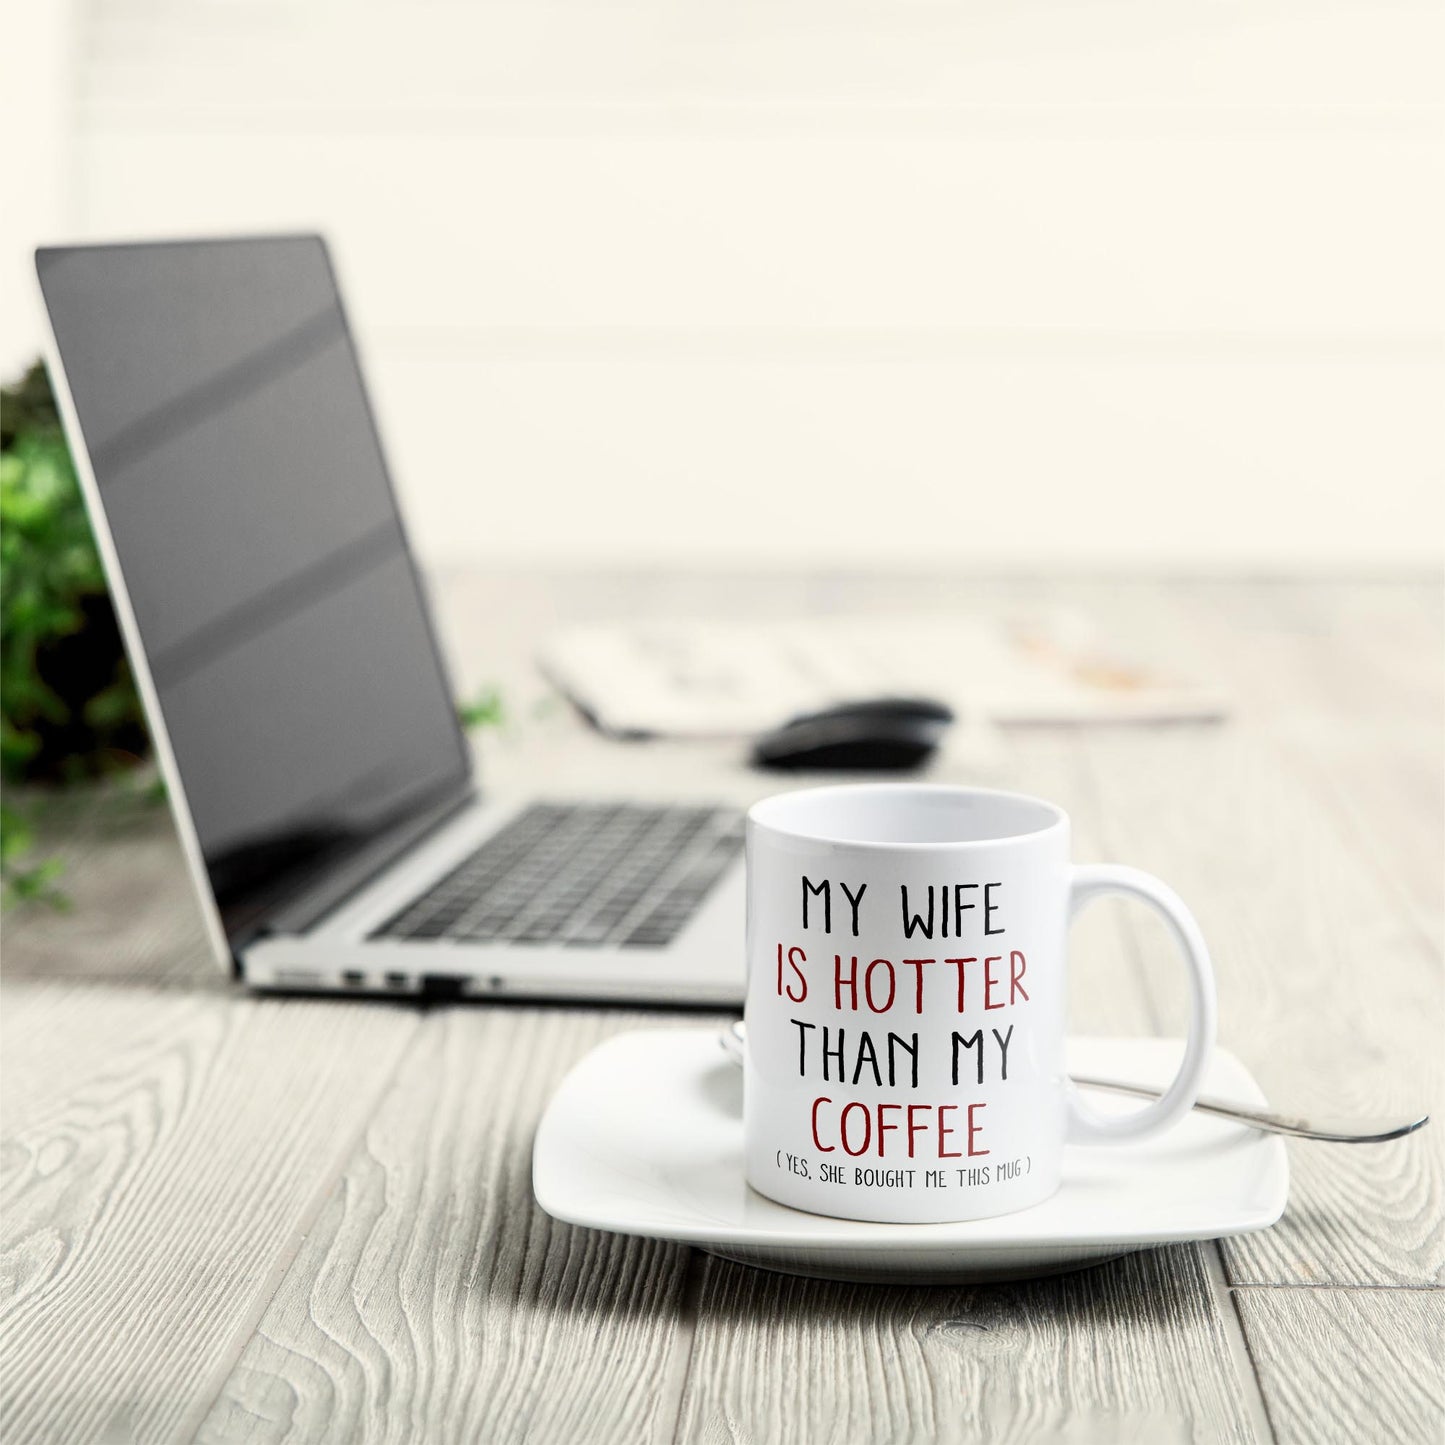 My Wife Is Hotter Than My Coffee - Personalized Mug - Valentine's Day, Christmas Gift For Husband, Boyfriend